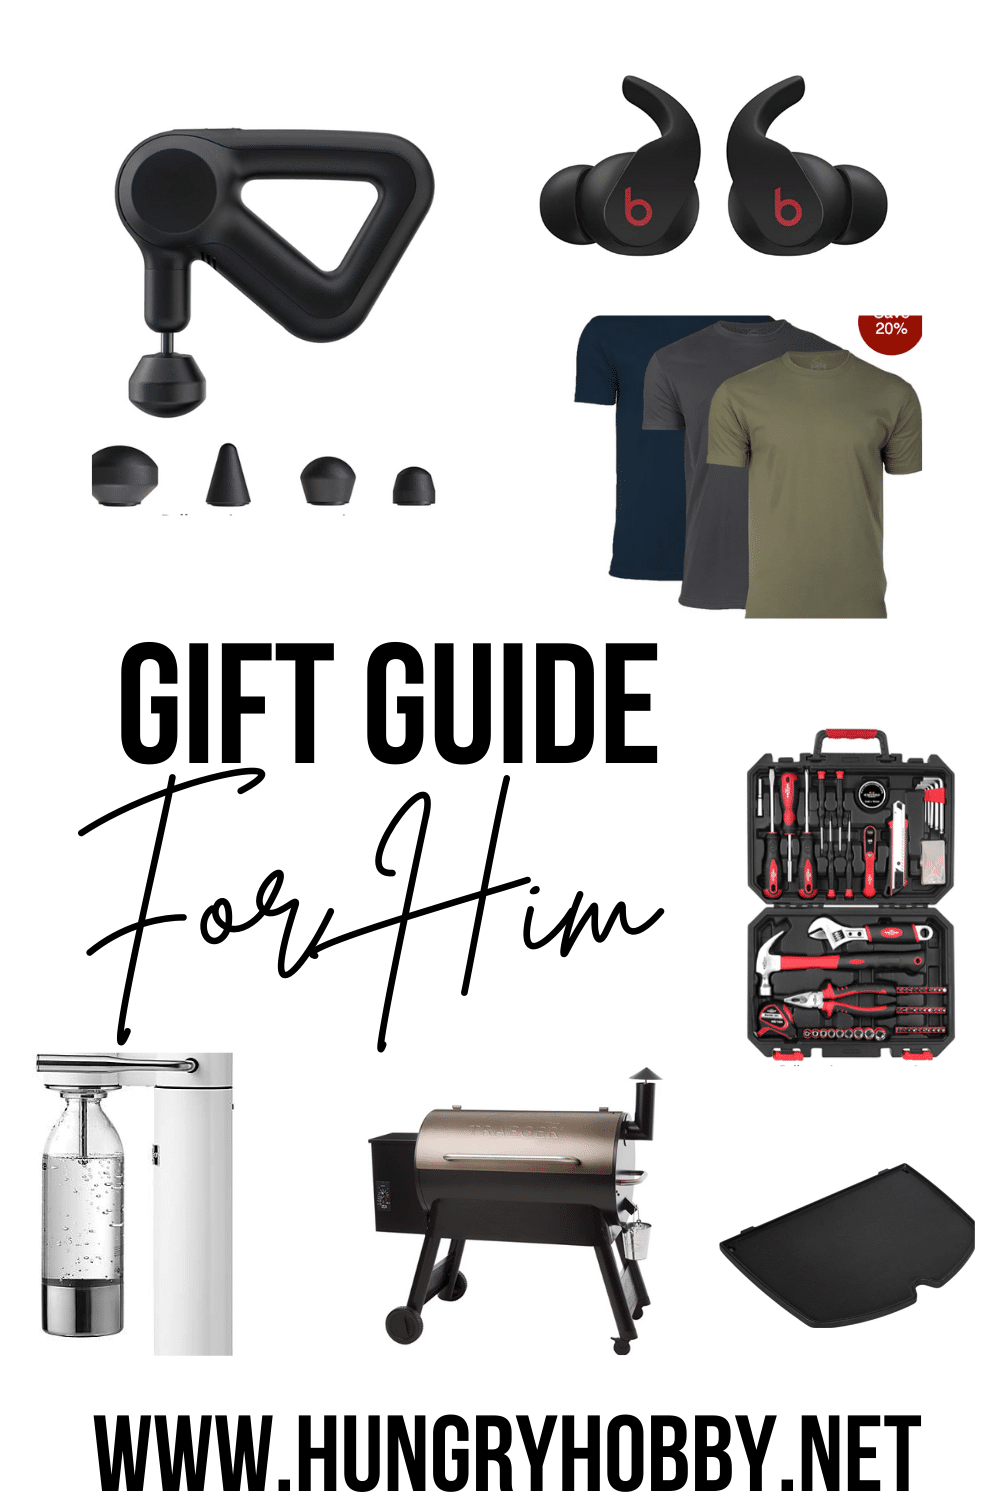 https://hungryhobby.net/wp-content/uploads/2021/12/gift-guide-for-him.png